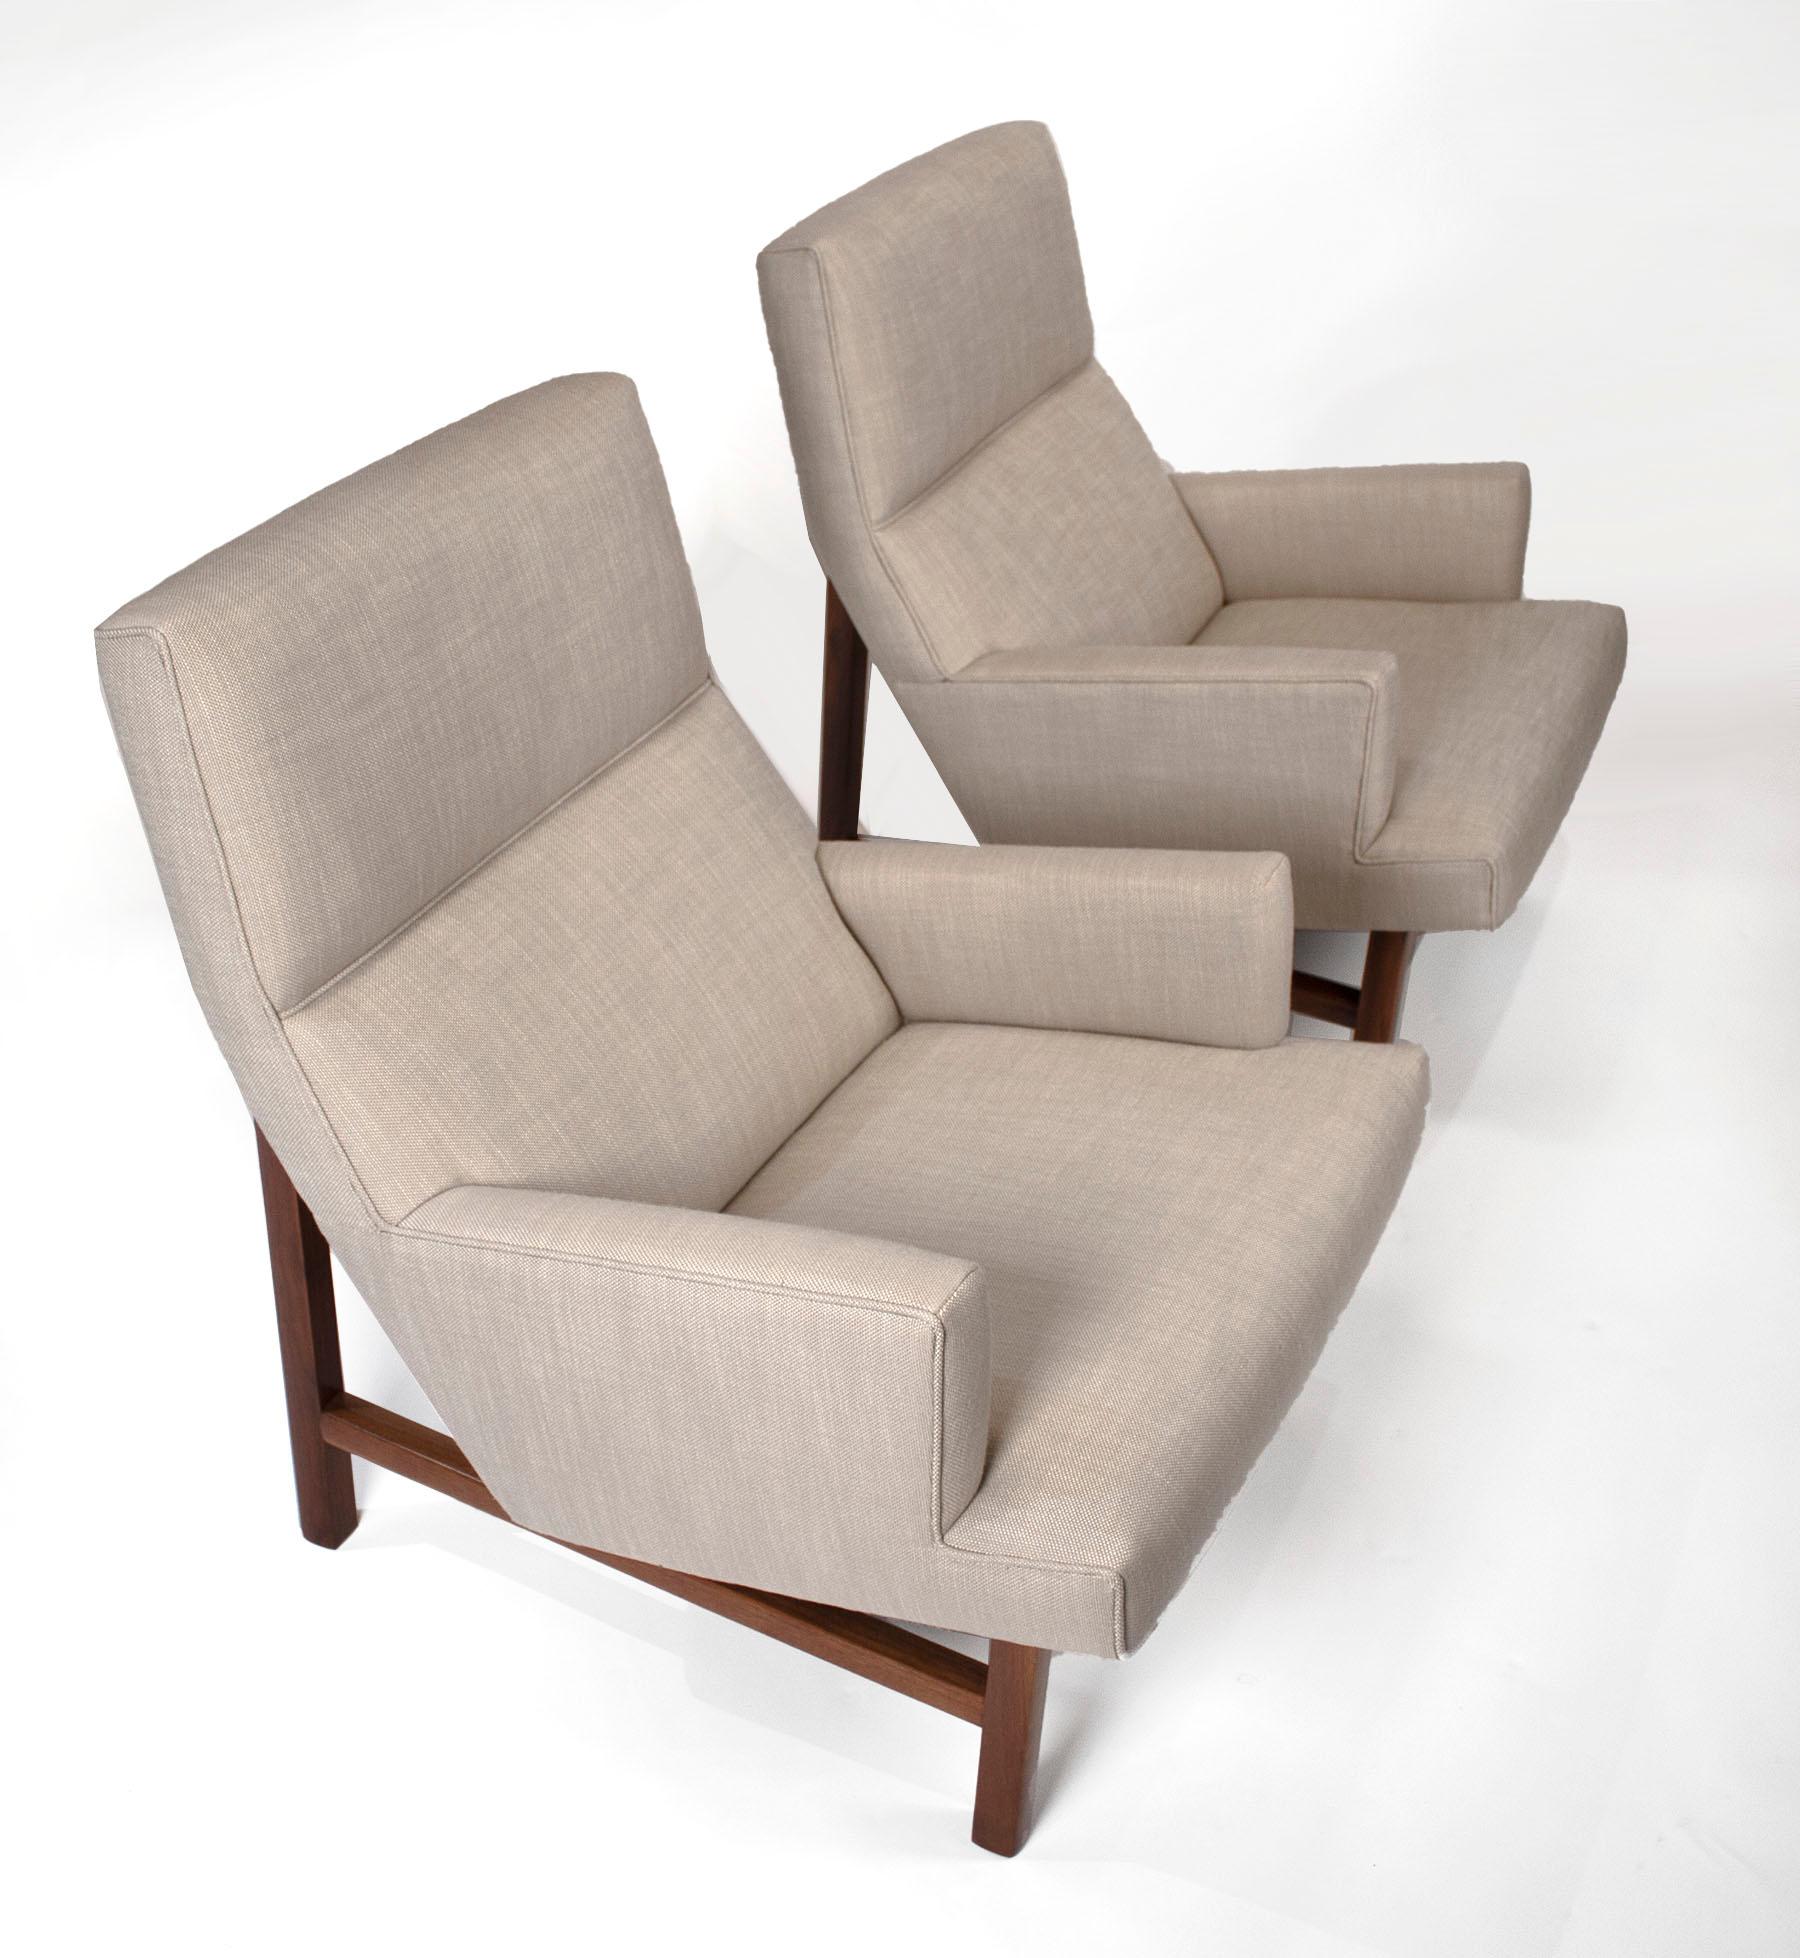 American Jen Risom Floating Lounge Chairs in Walnut Cradle Frames with Linen Upholstery